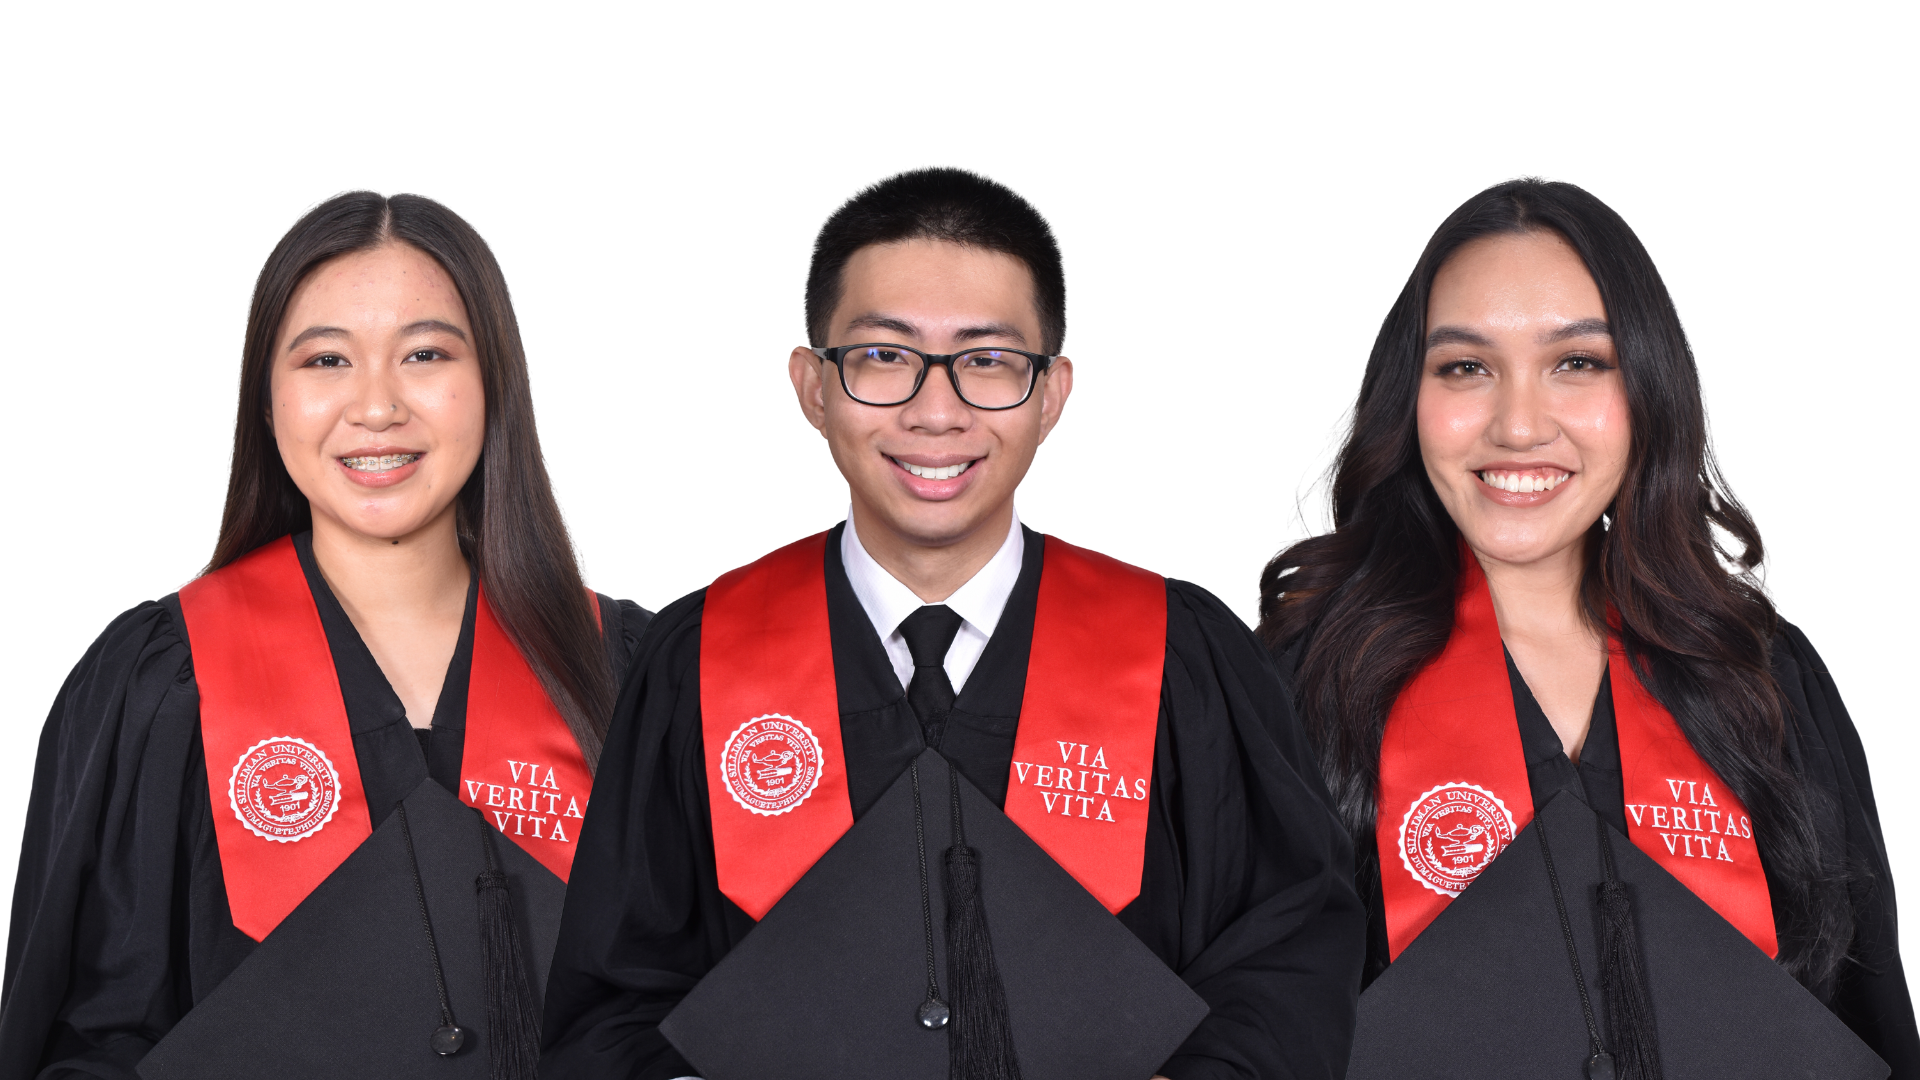 3 University students to receive the highest honors on Sunday’s graduation